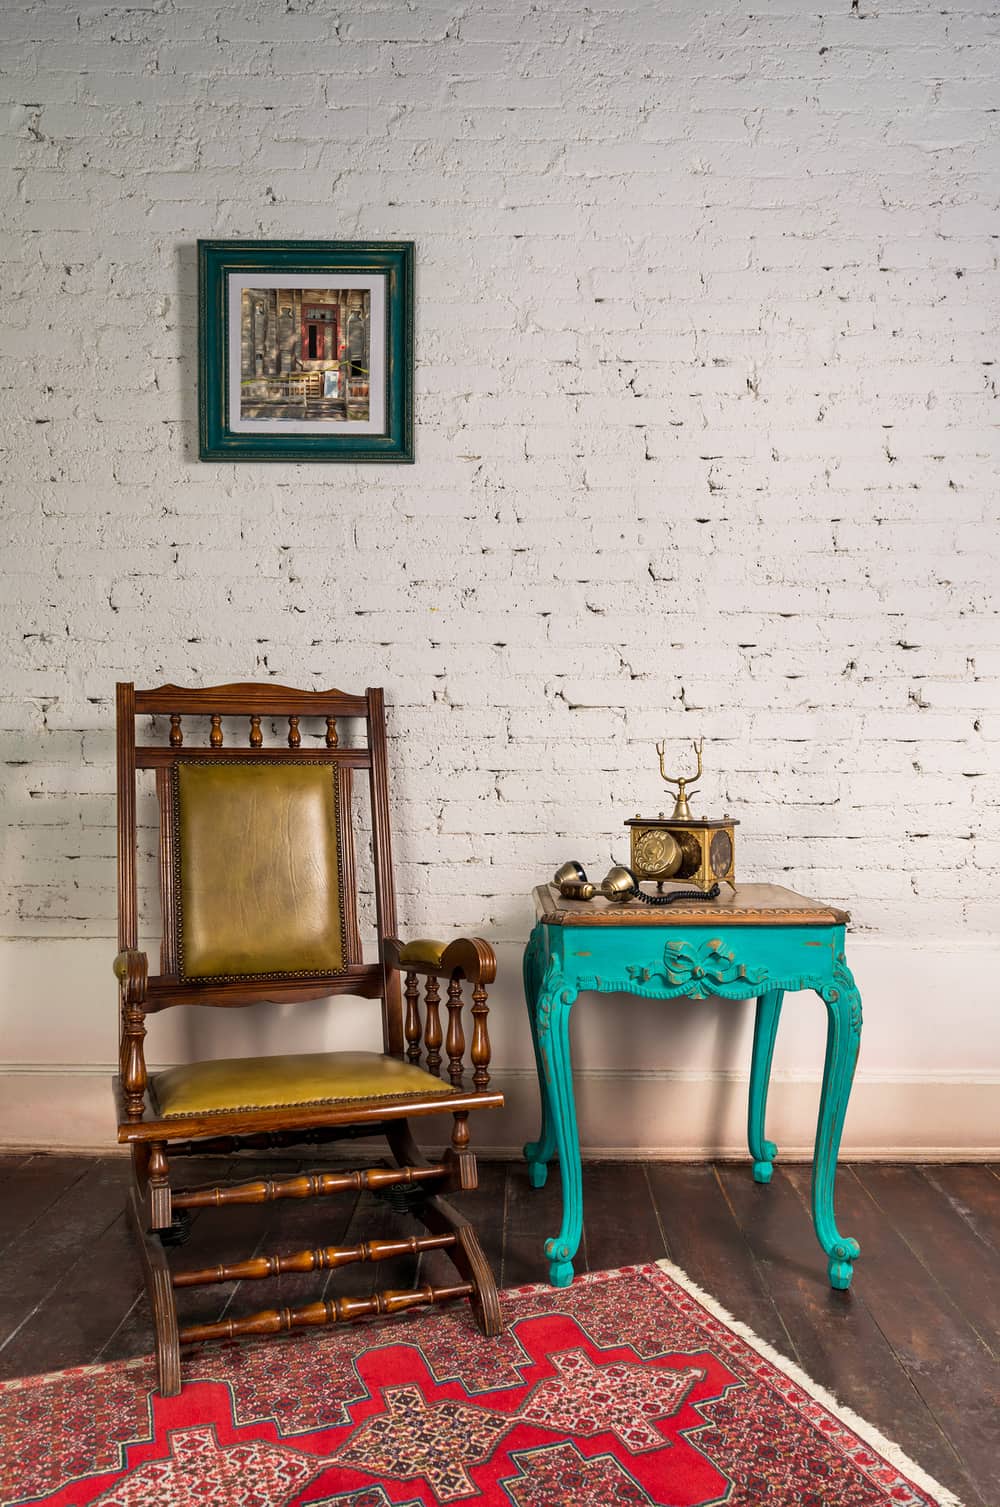 Classical wooden rocking chair, antique golden telephone set on top of green wooden vintage table and background of white bricks wall with hanged painting and parquet floor with red carpet